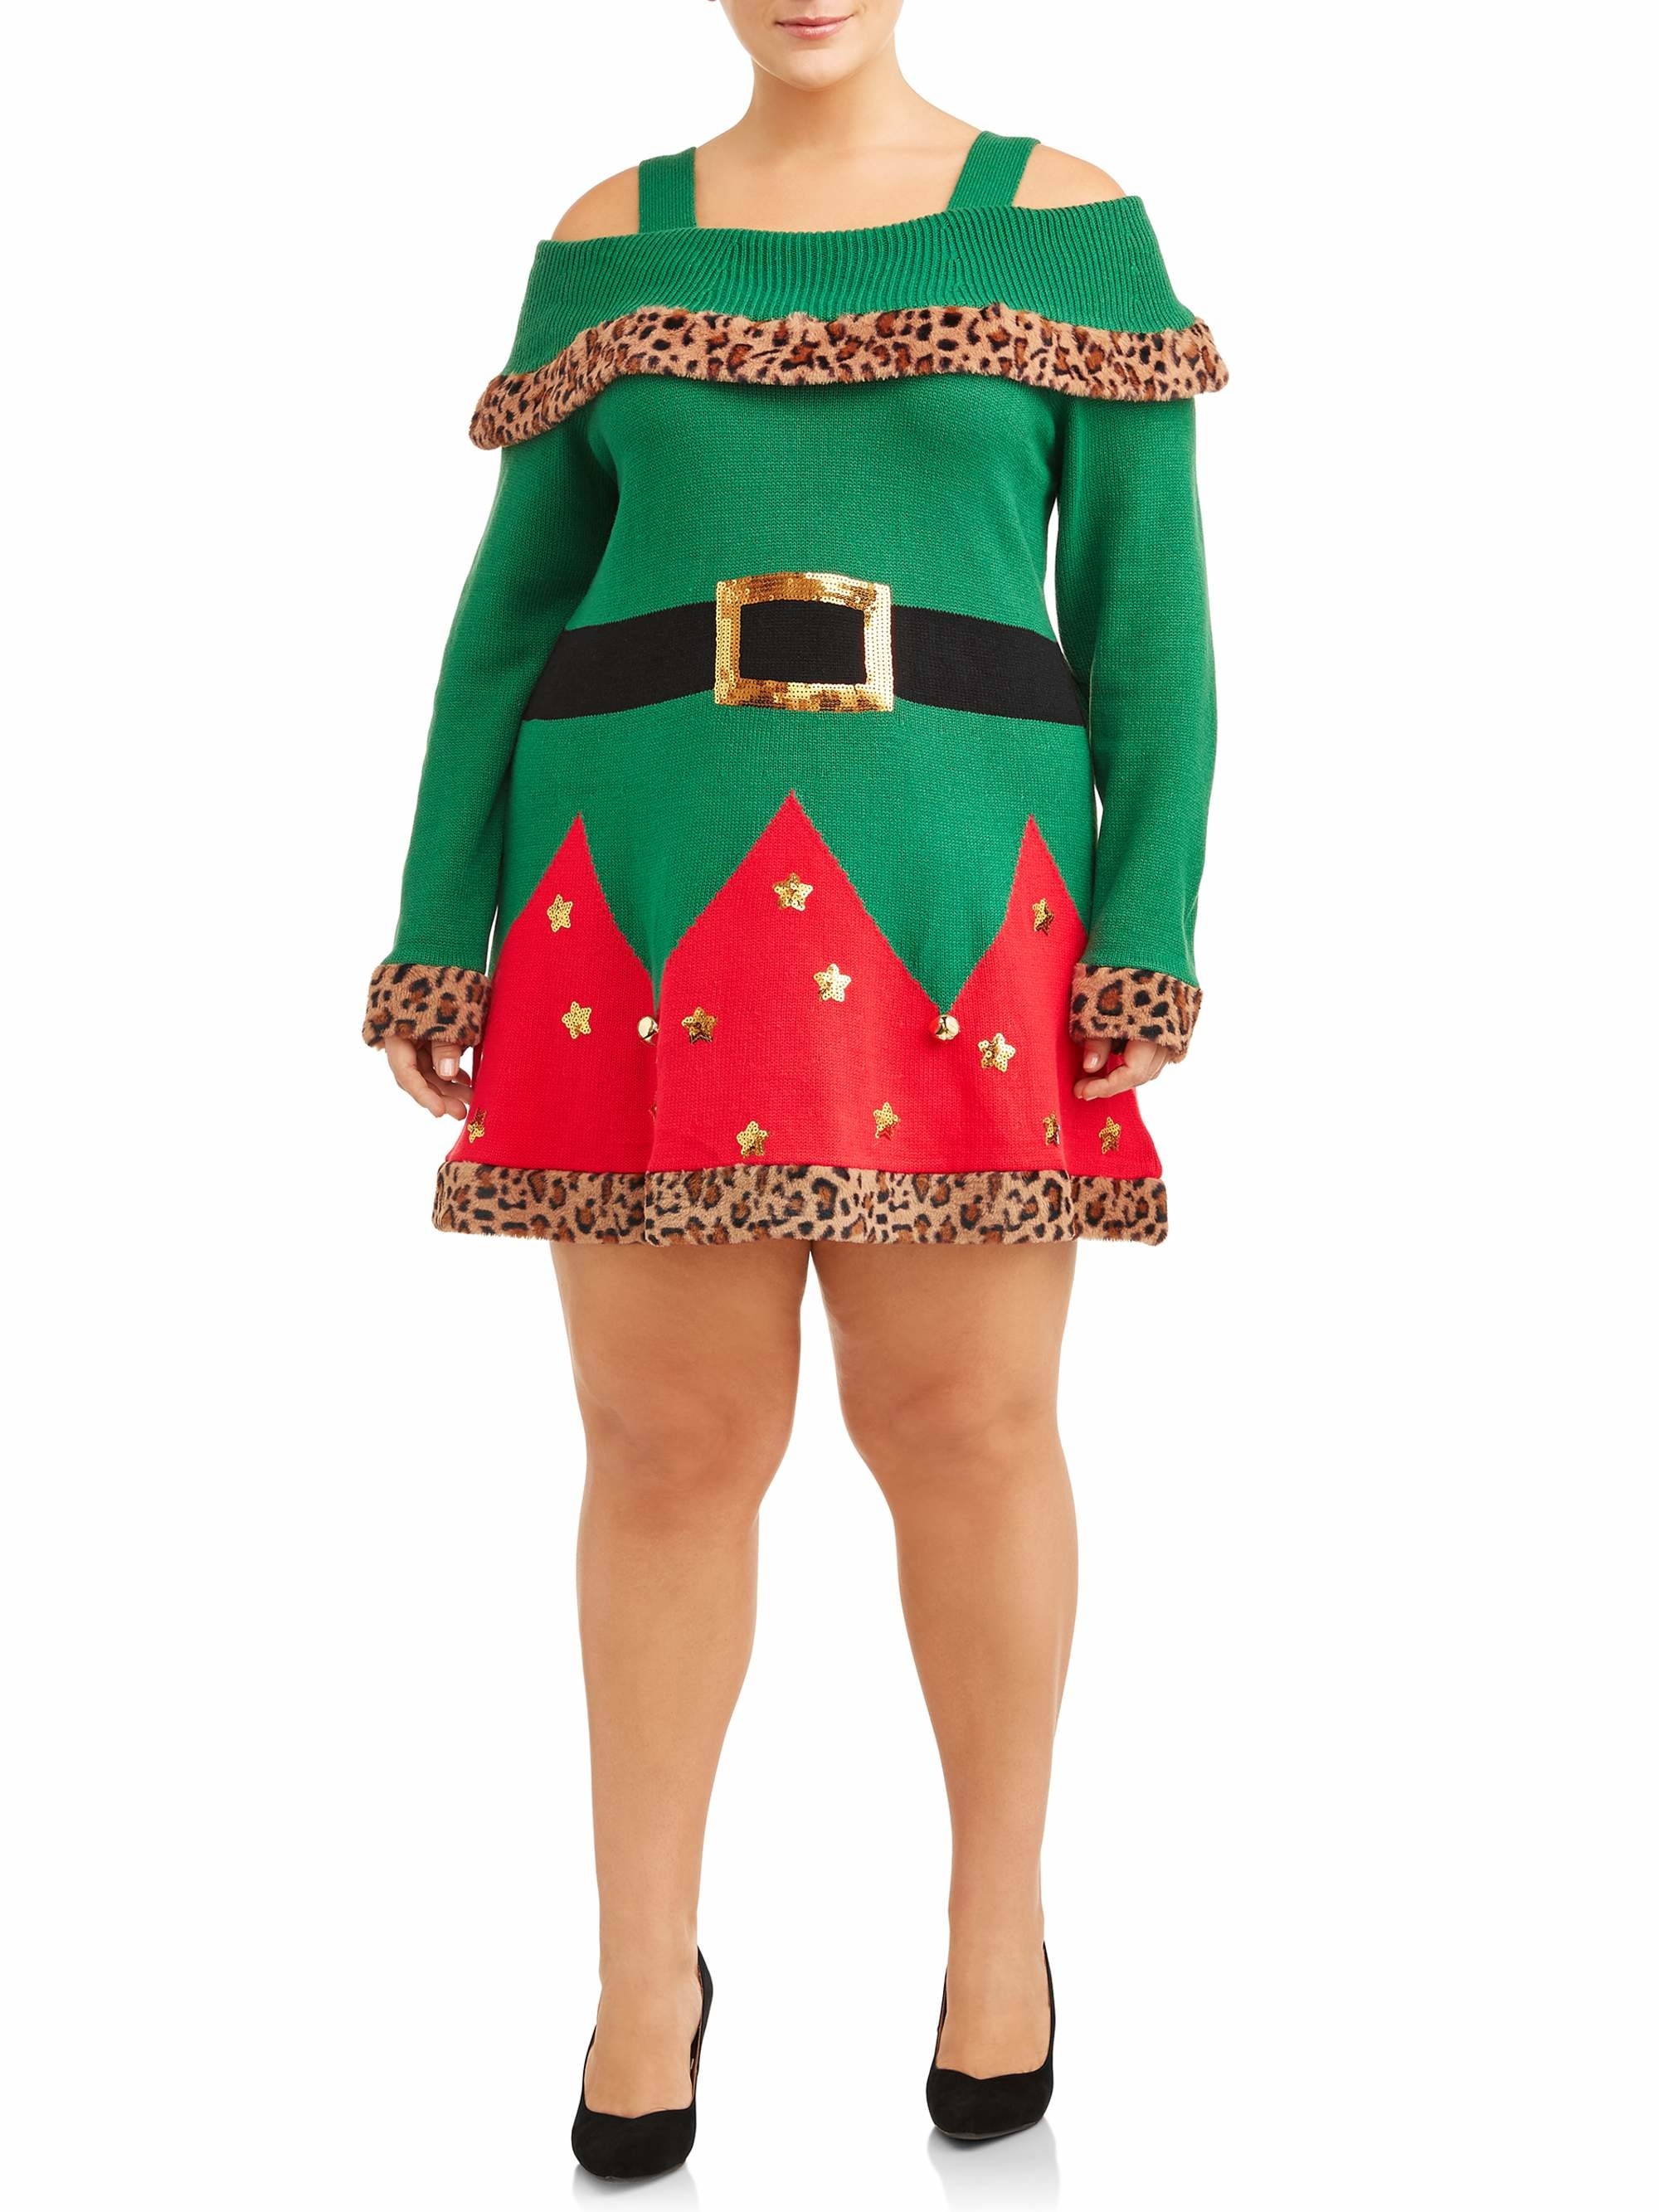 34 Surprisingly Cute Dresses From Walmart To Wear To All Your Holiday ...